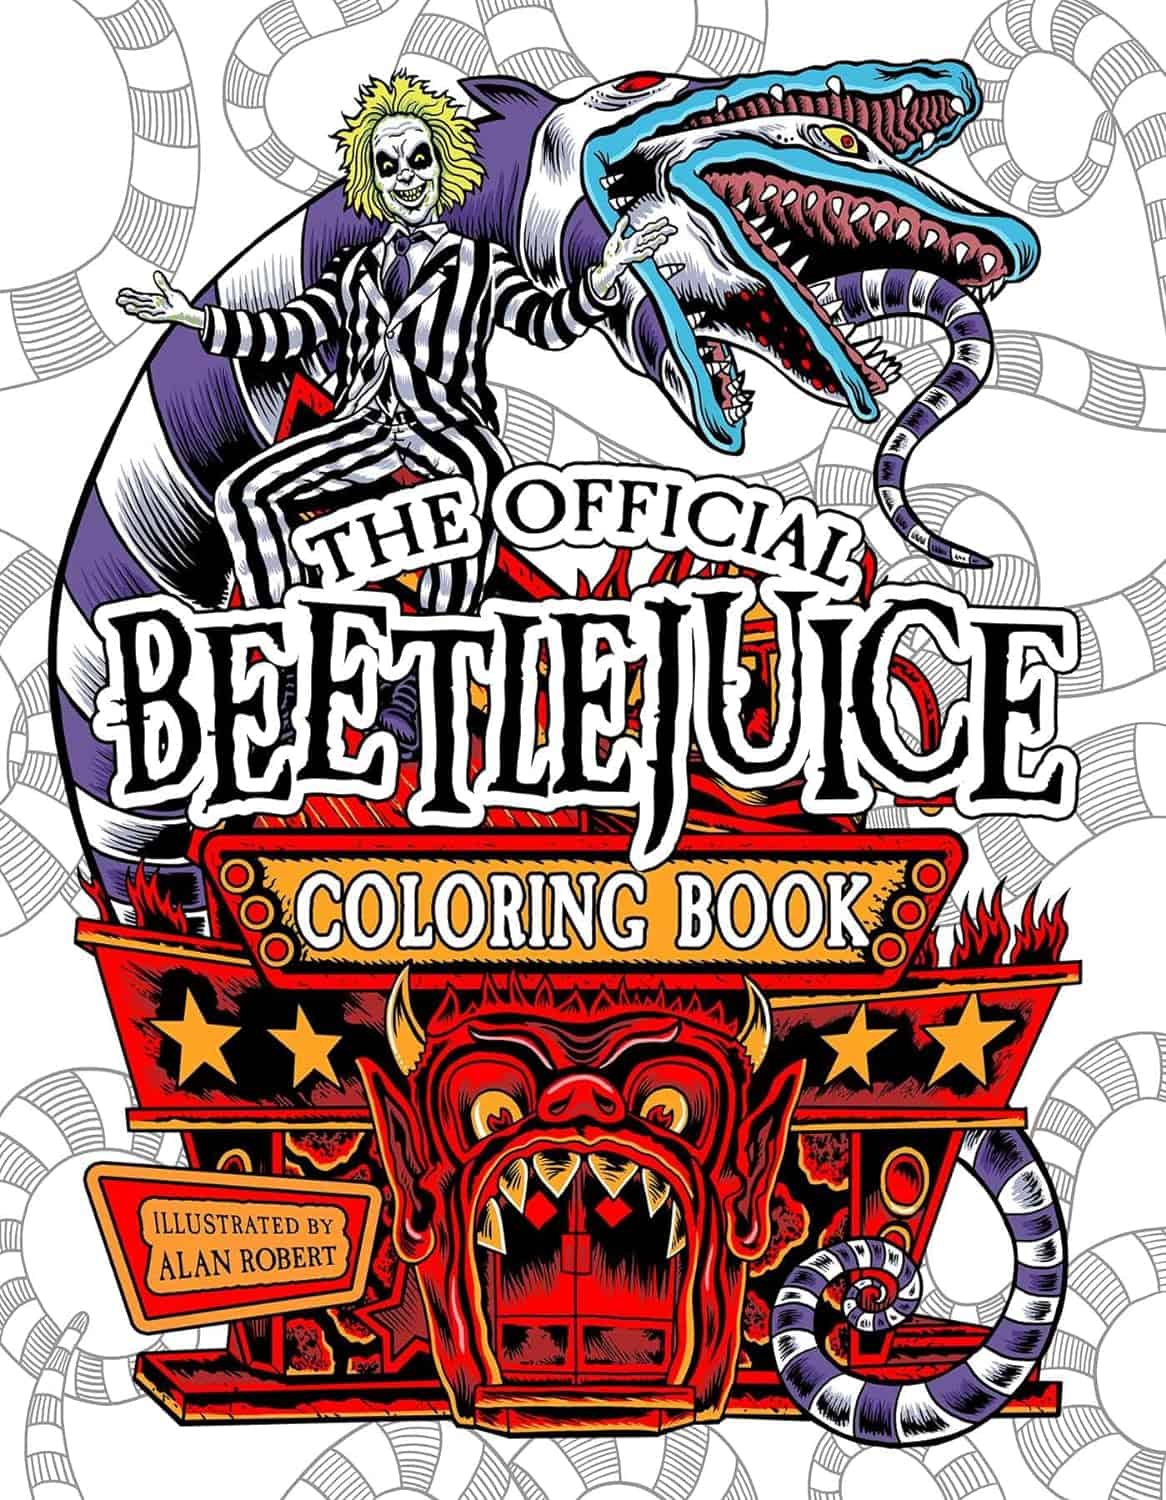 Beetlejuice: The Official Coloring Book coming in September